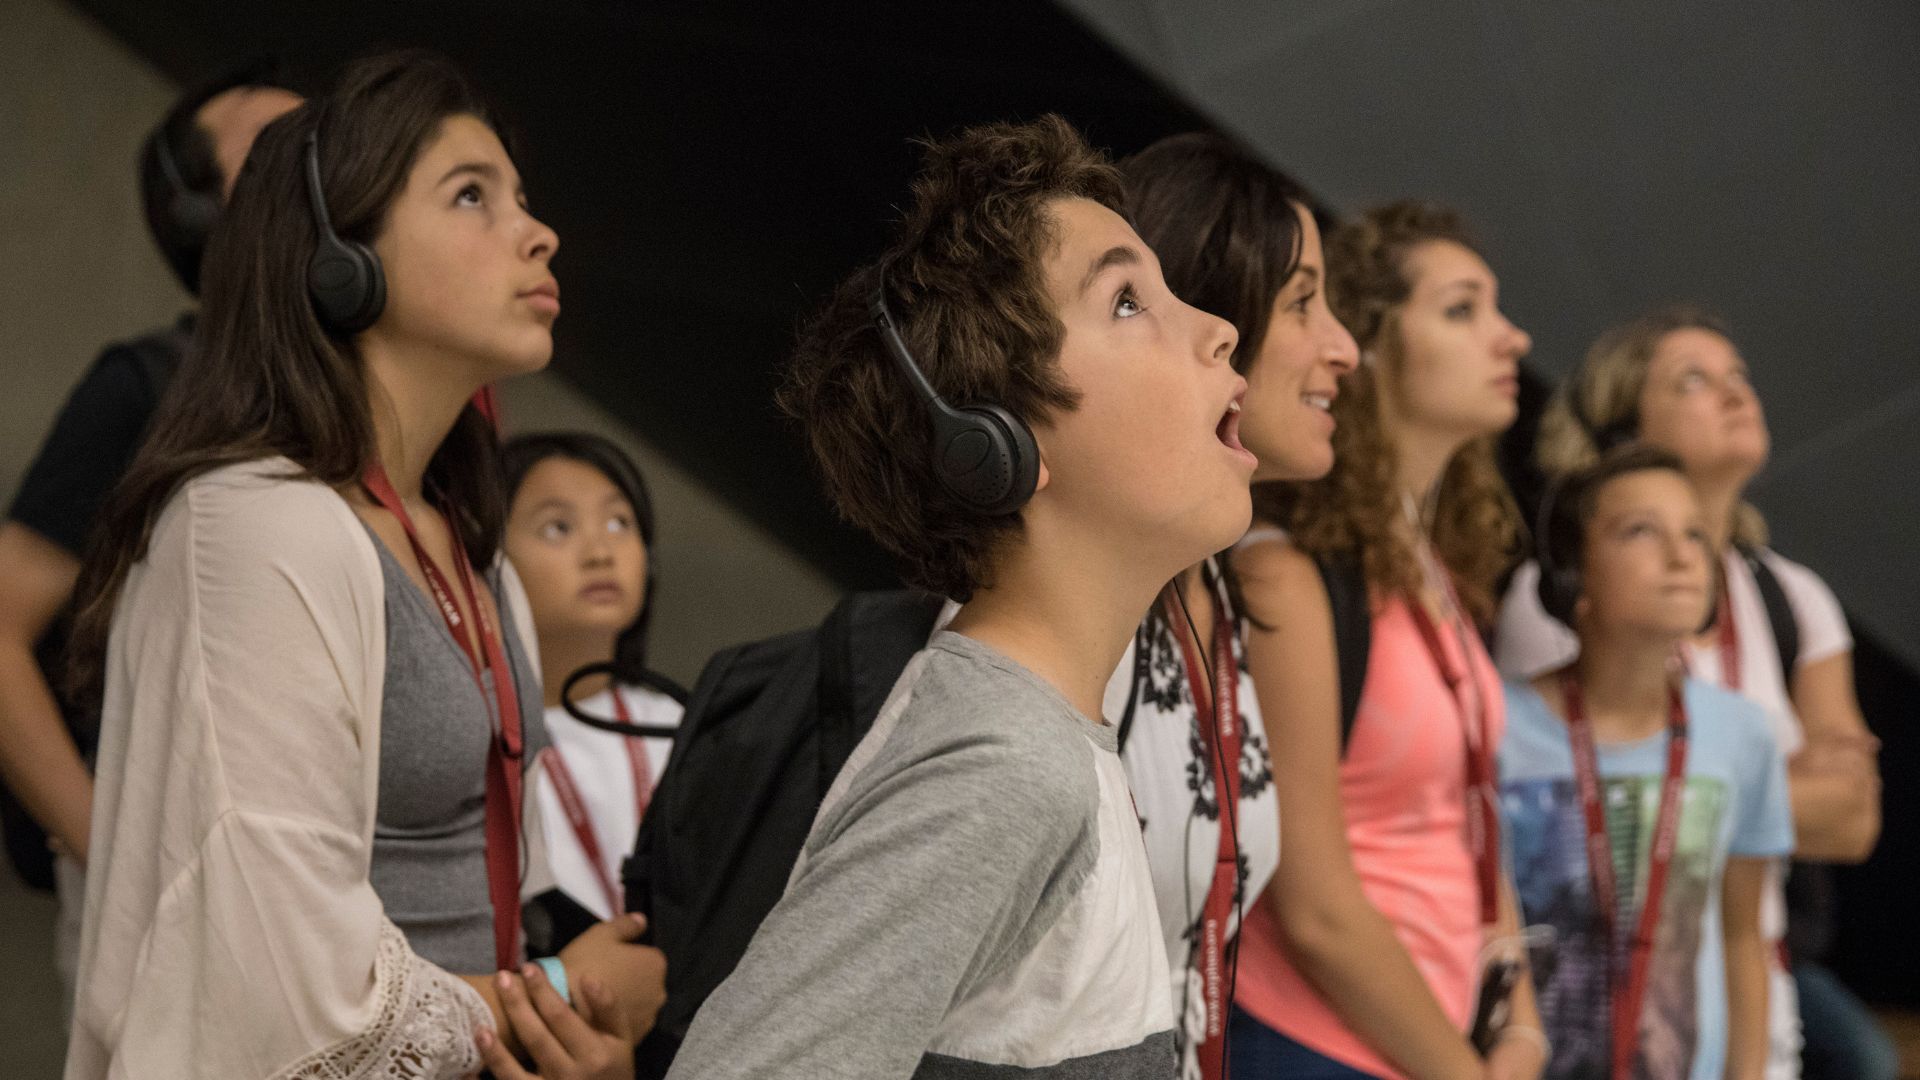 A small group of kids and adults wearing headphones look up in wonder